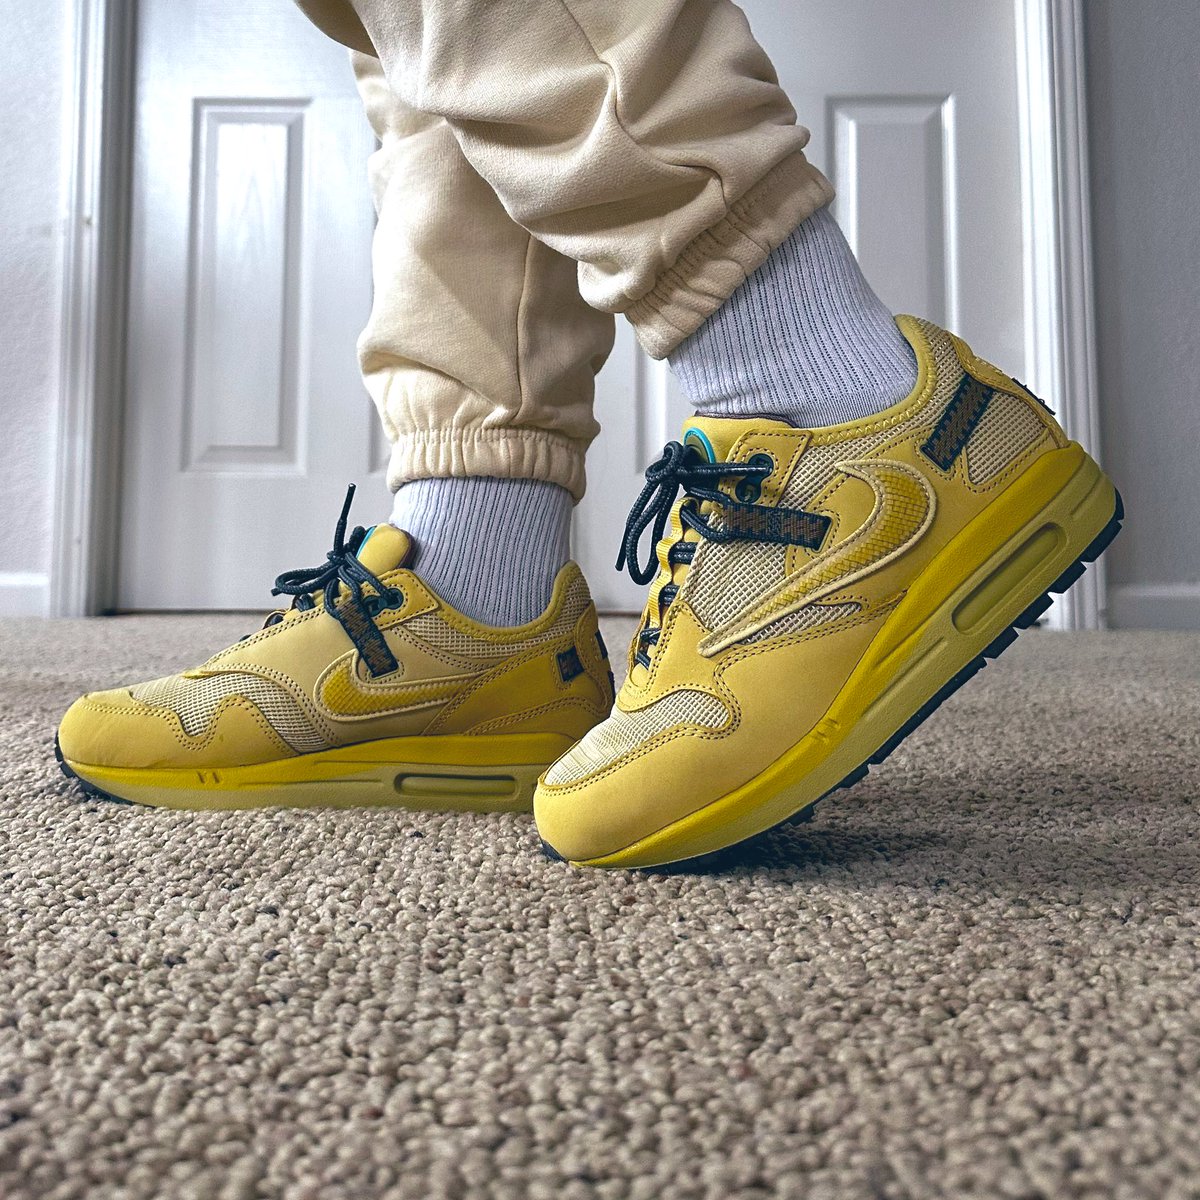 The sun finally showed its face today 🌤️💛 #marchMAXness #KOTD